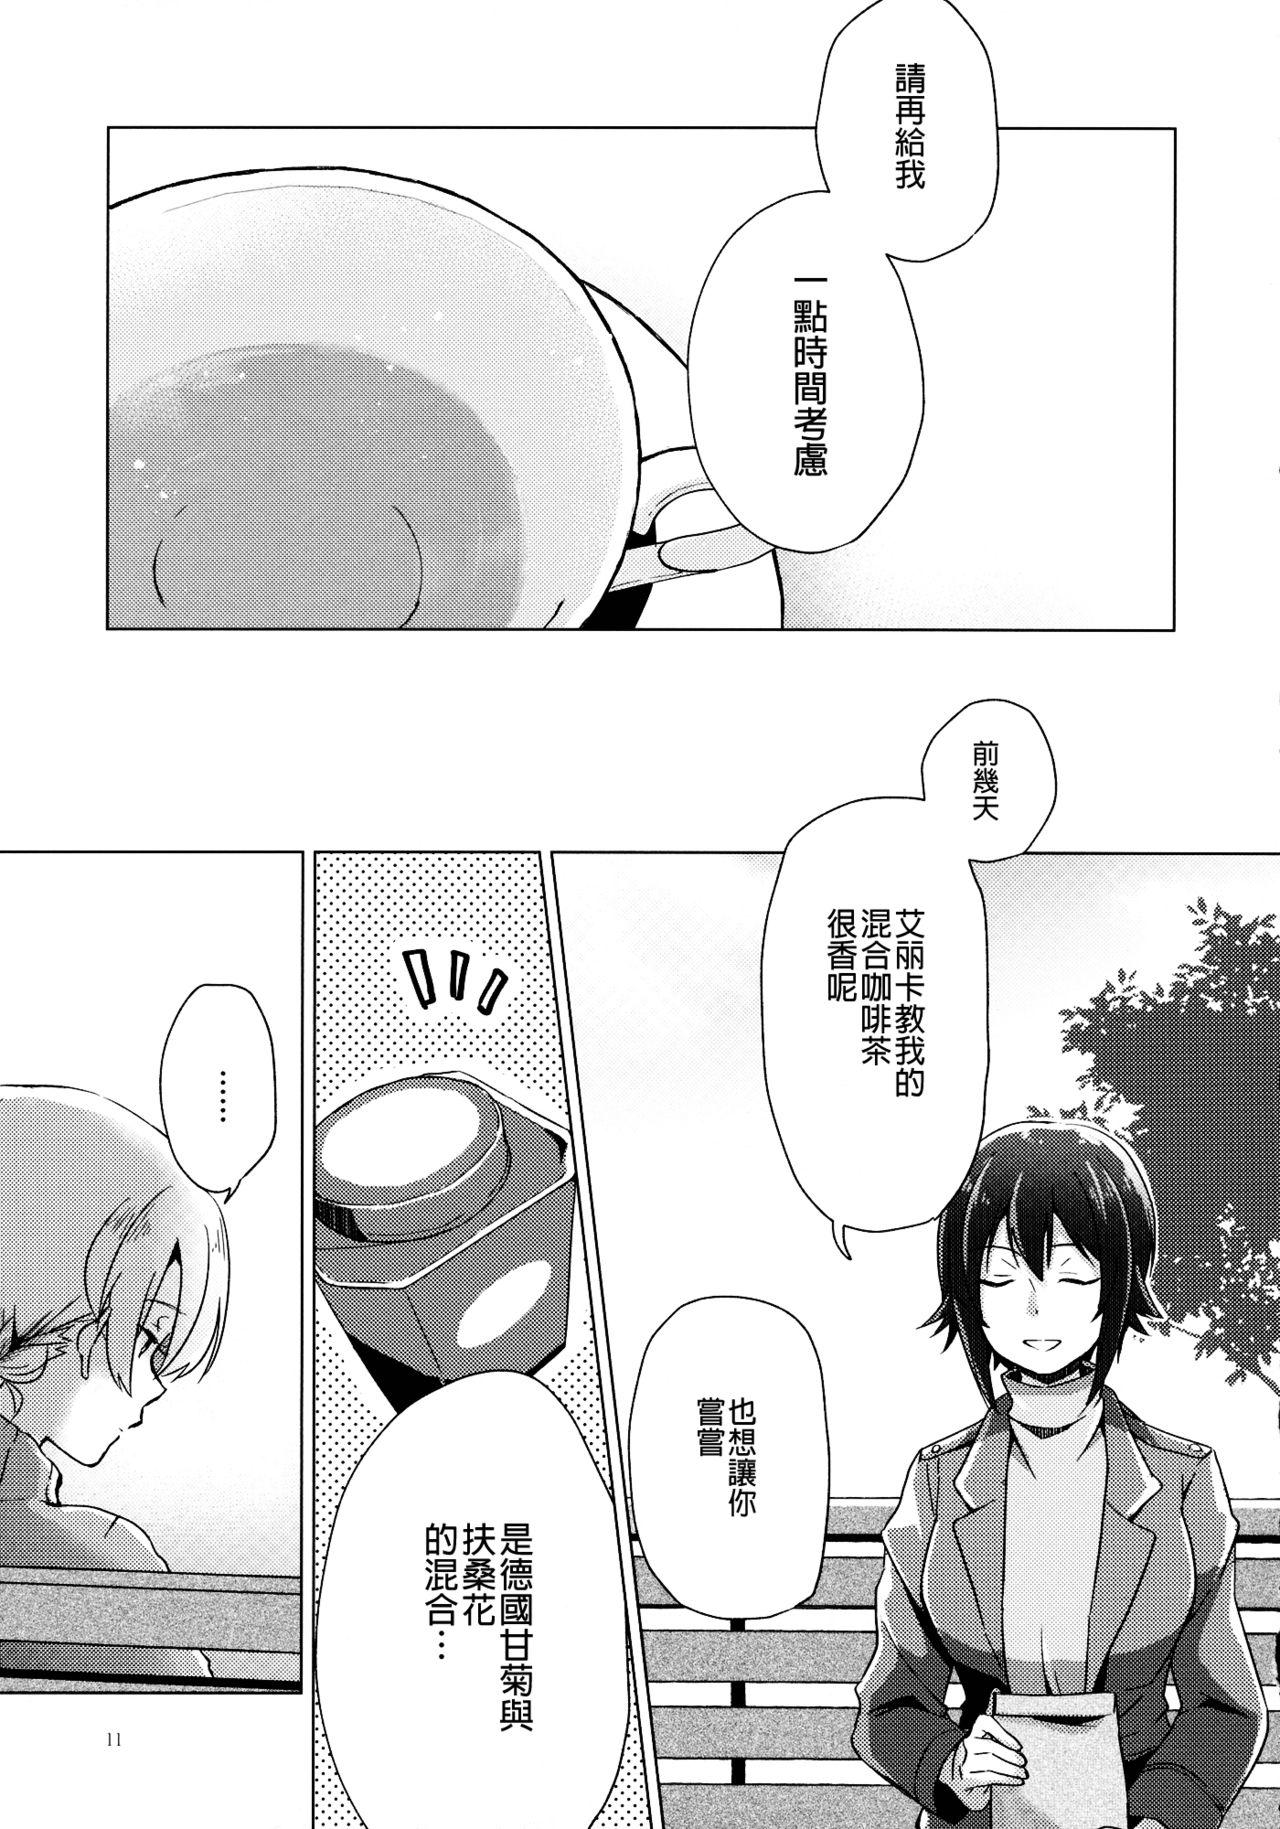 Bj Over Time | 超時 - Girls und panzer Bhabi - Page 11